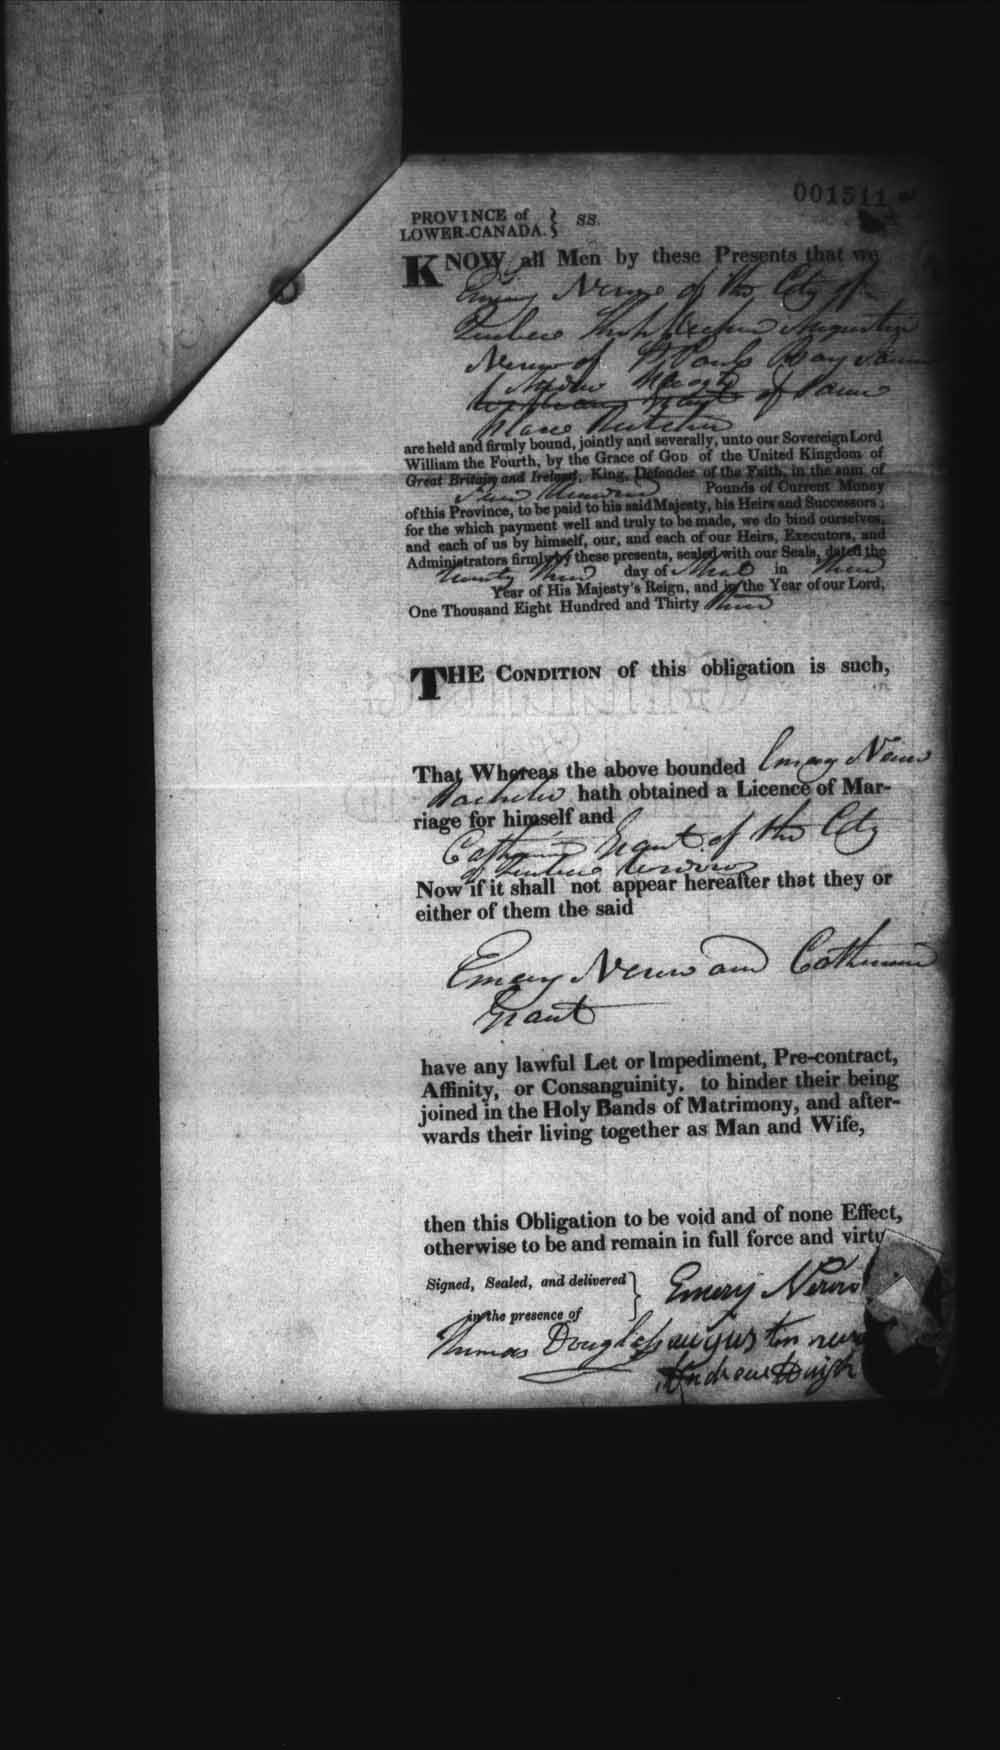 Digitized page of Upper and Lower Canada Marriage Bonds (1779-1865) for Image No.: e008237803